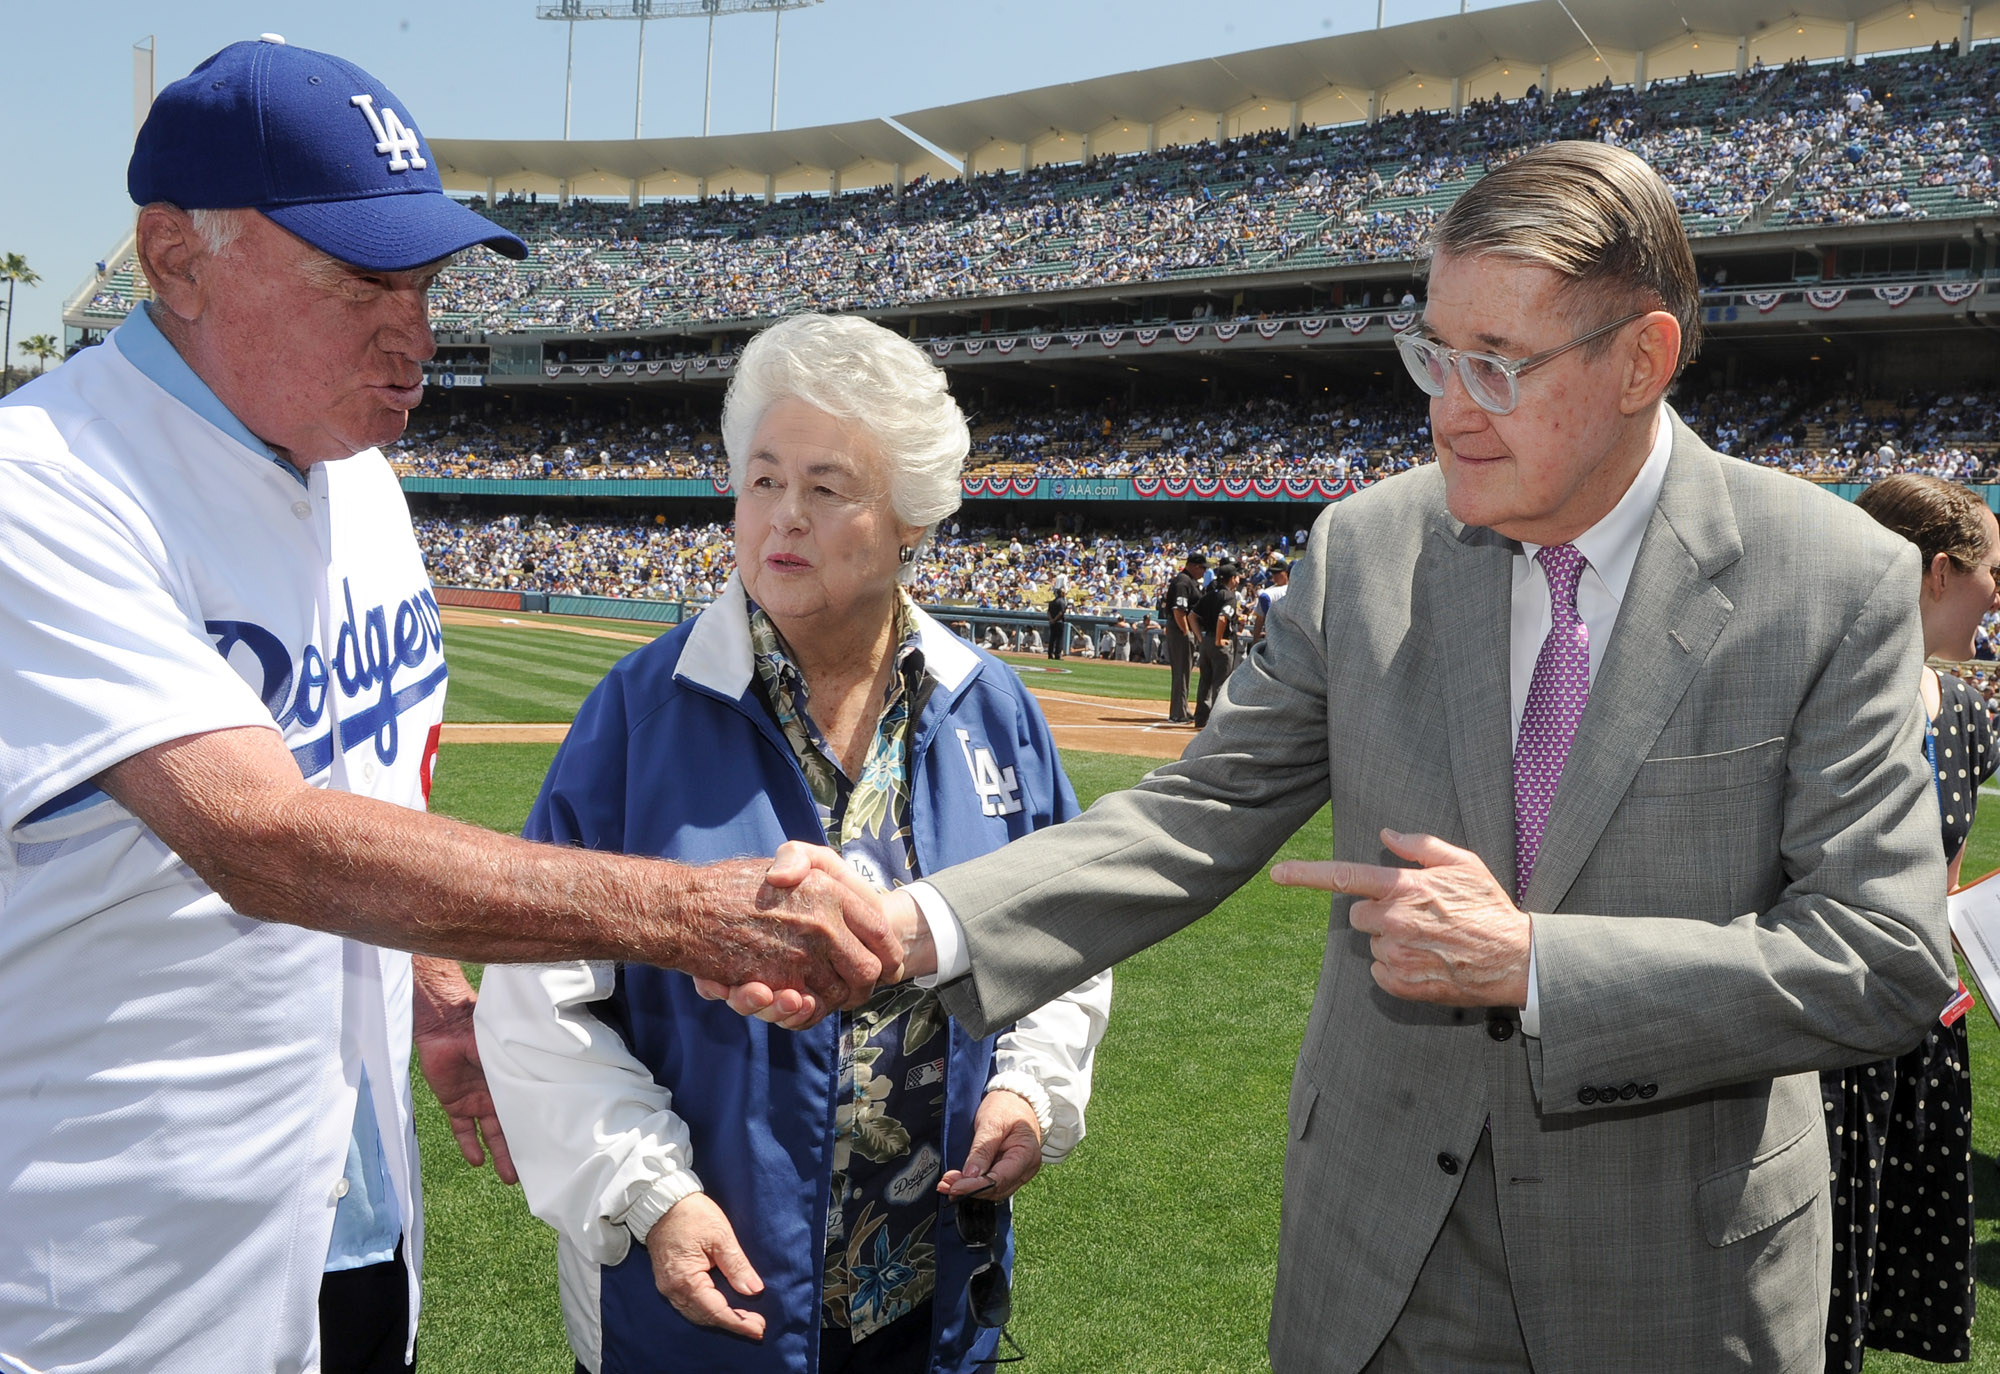 Roz Wyman, former Los Angeles City Council member help bring the Brooklyn Dodgers to Los Angeles passed away at the age of 92.